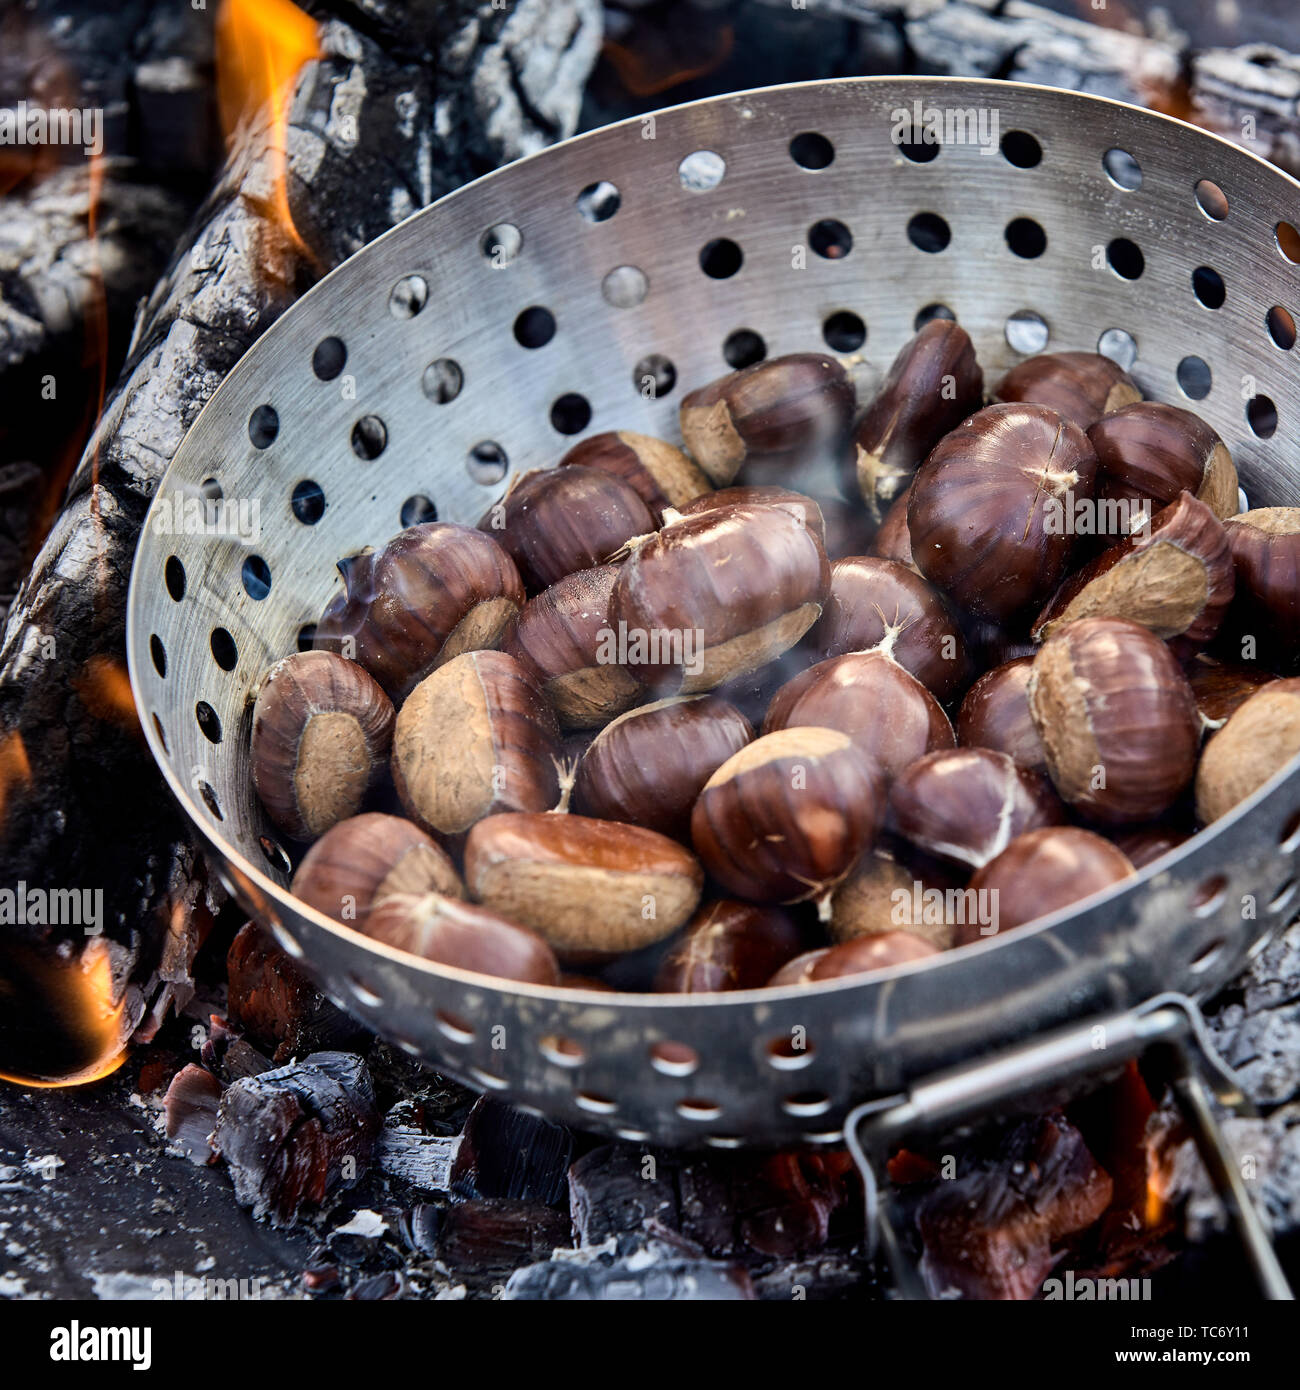 Fresh whole sweet chestnuts in their shells in a metal roaster over hot coals on a barbecue fire in a close up view Stock Photo